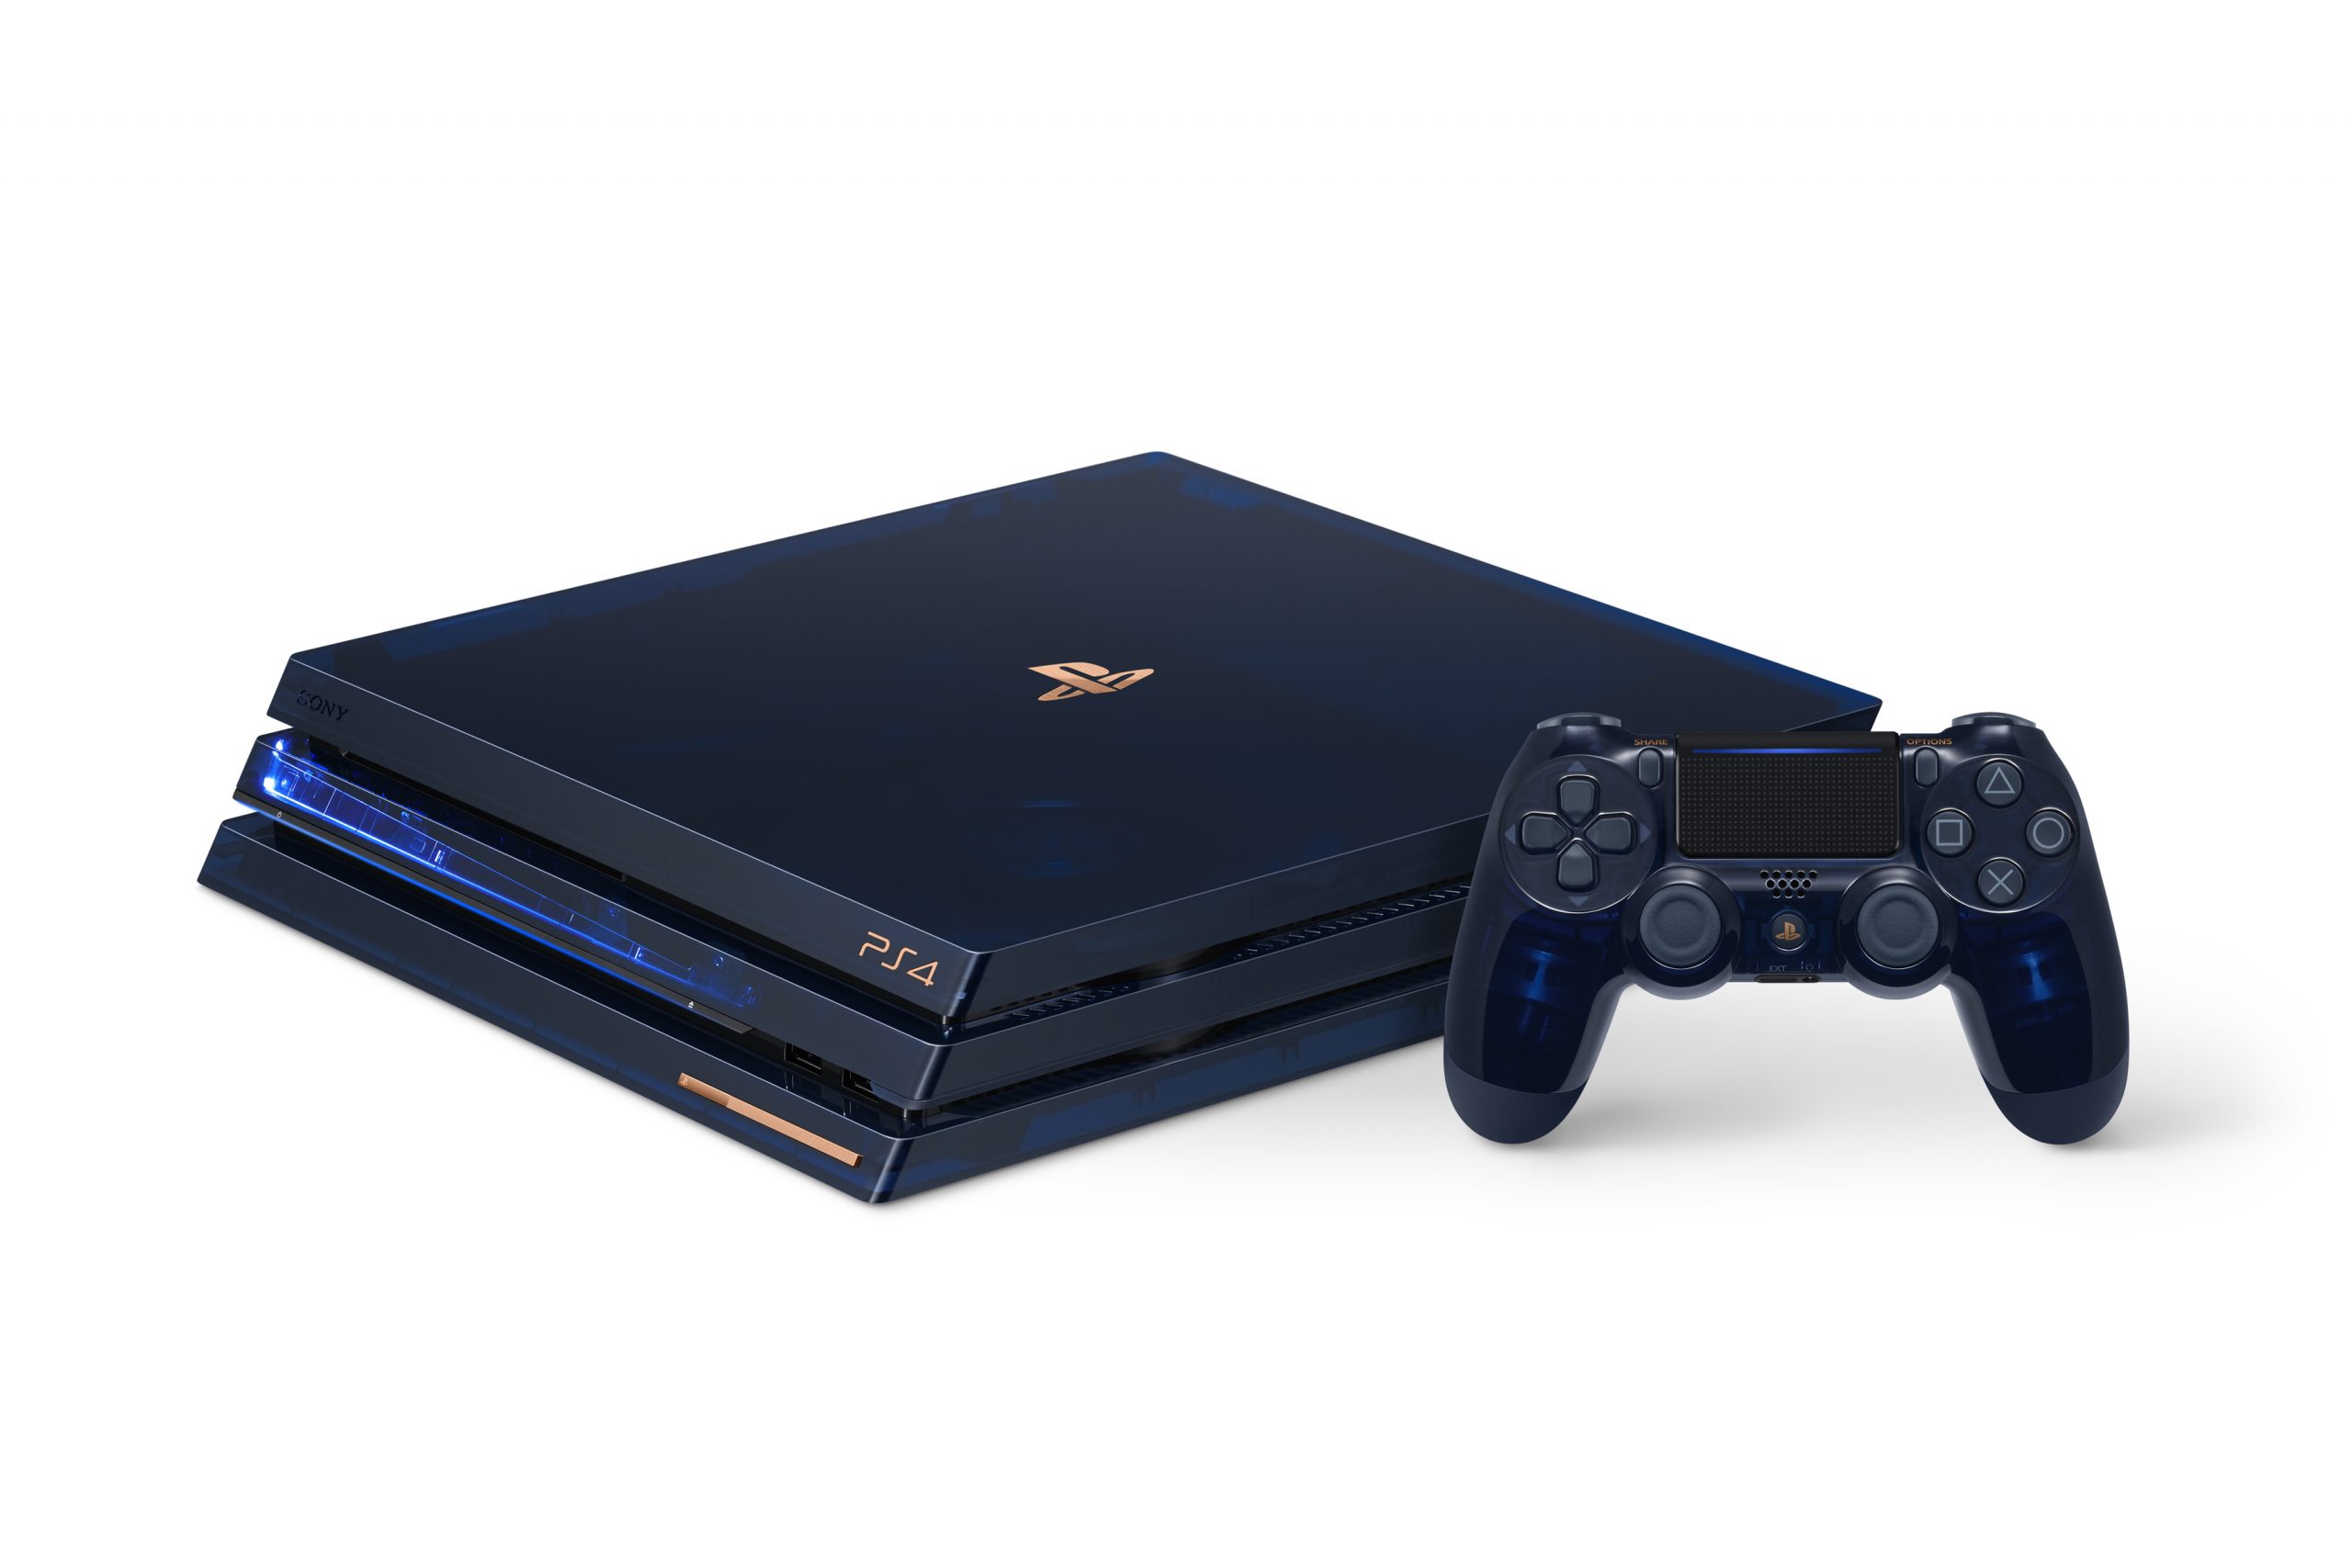 Sony announces the gorgeous Limited Edition Translucent Blue